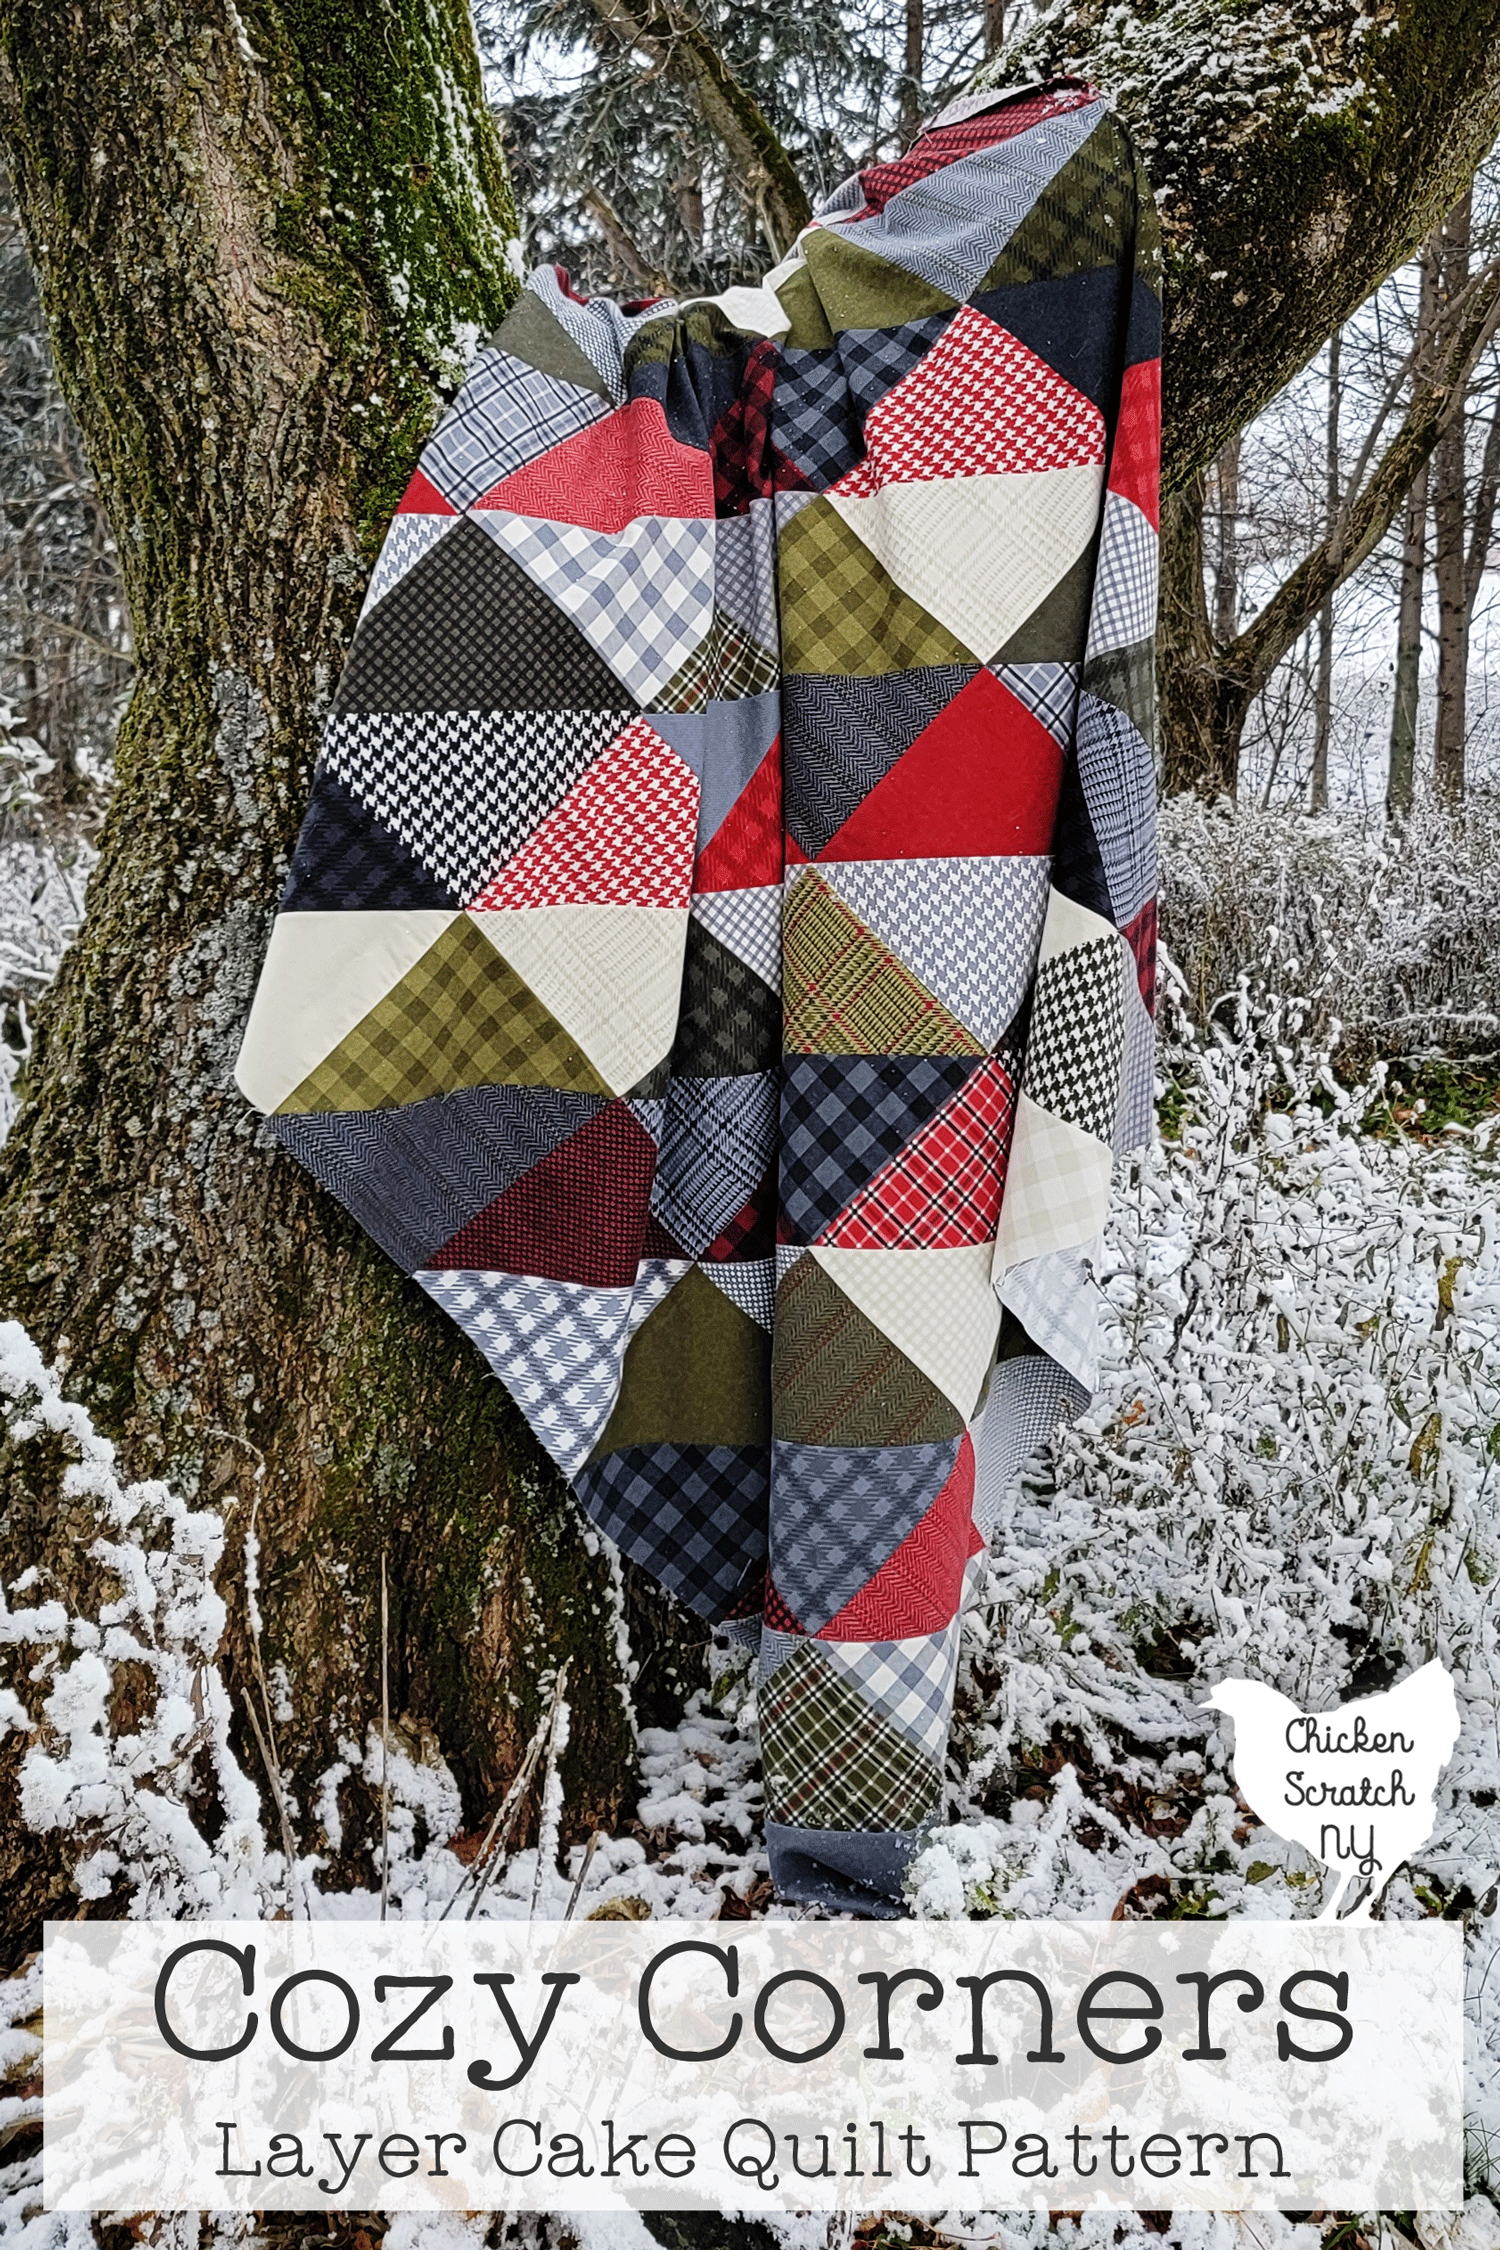 cozy corners quilt sewn with red, green, cream and gray flannel displayed in a tree surrounded by snow with text overlay "cozy corners layer cake quilt pattern"